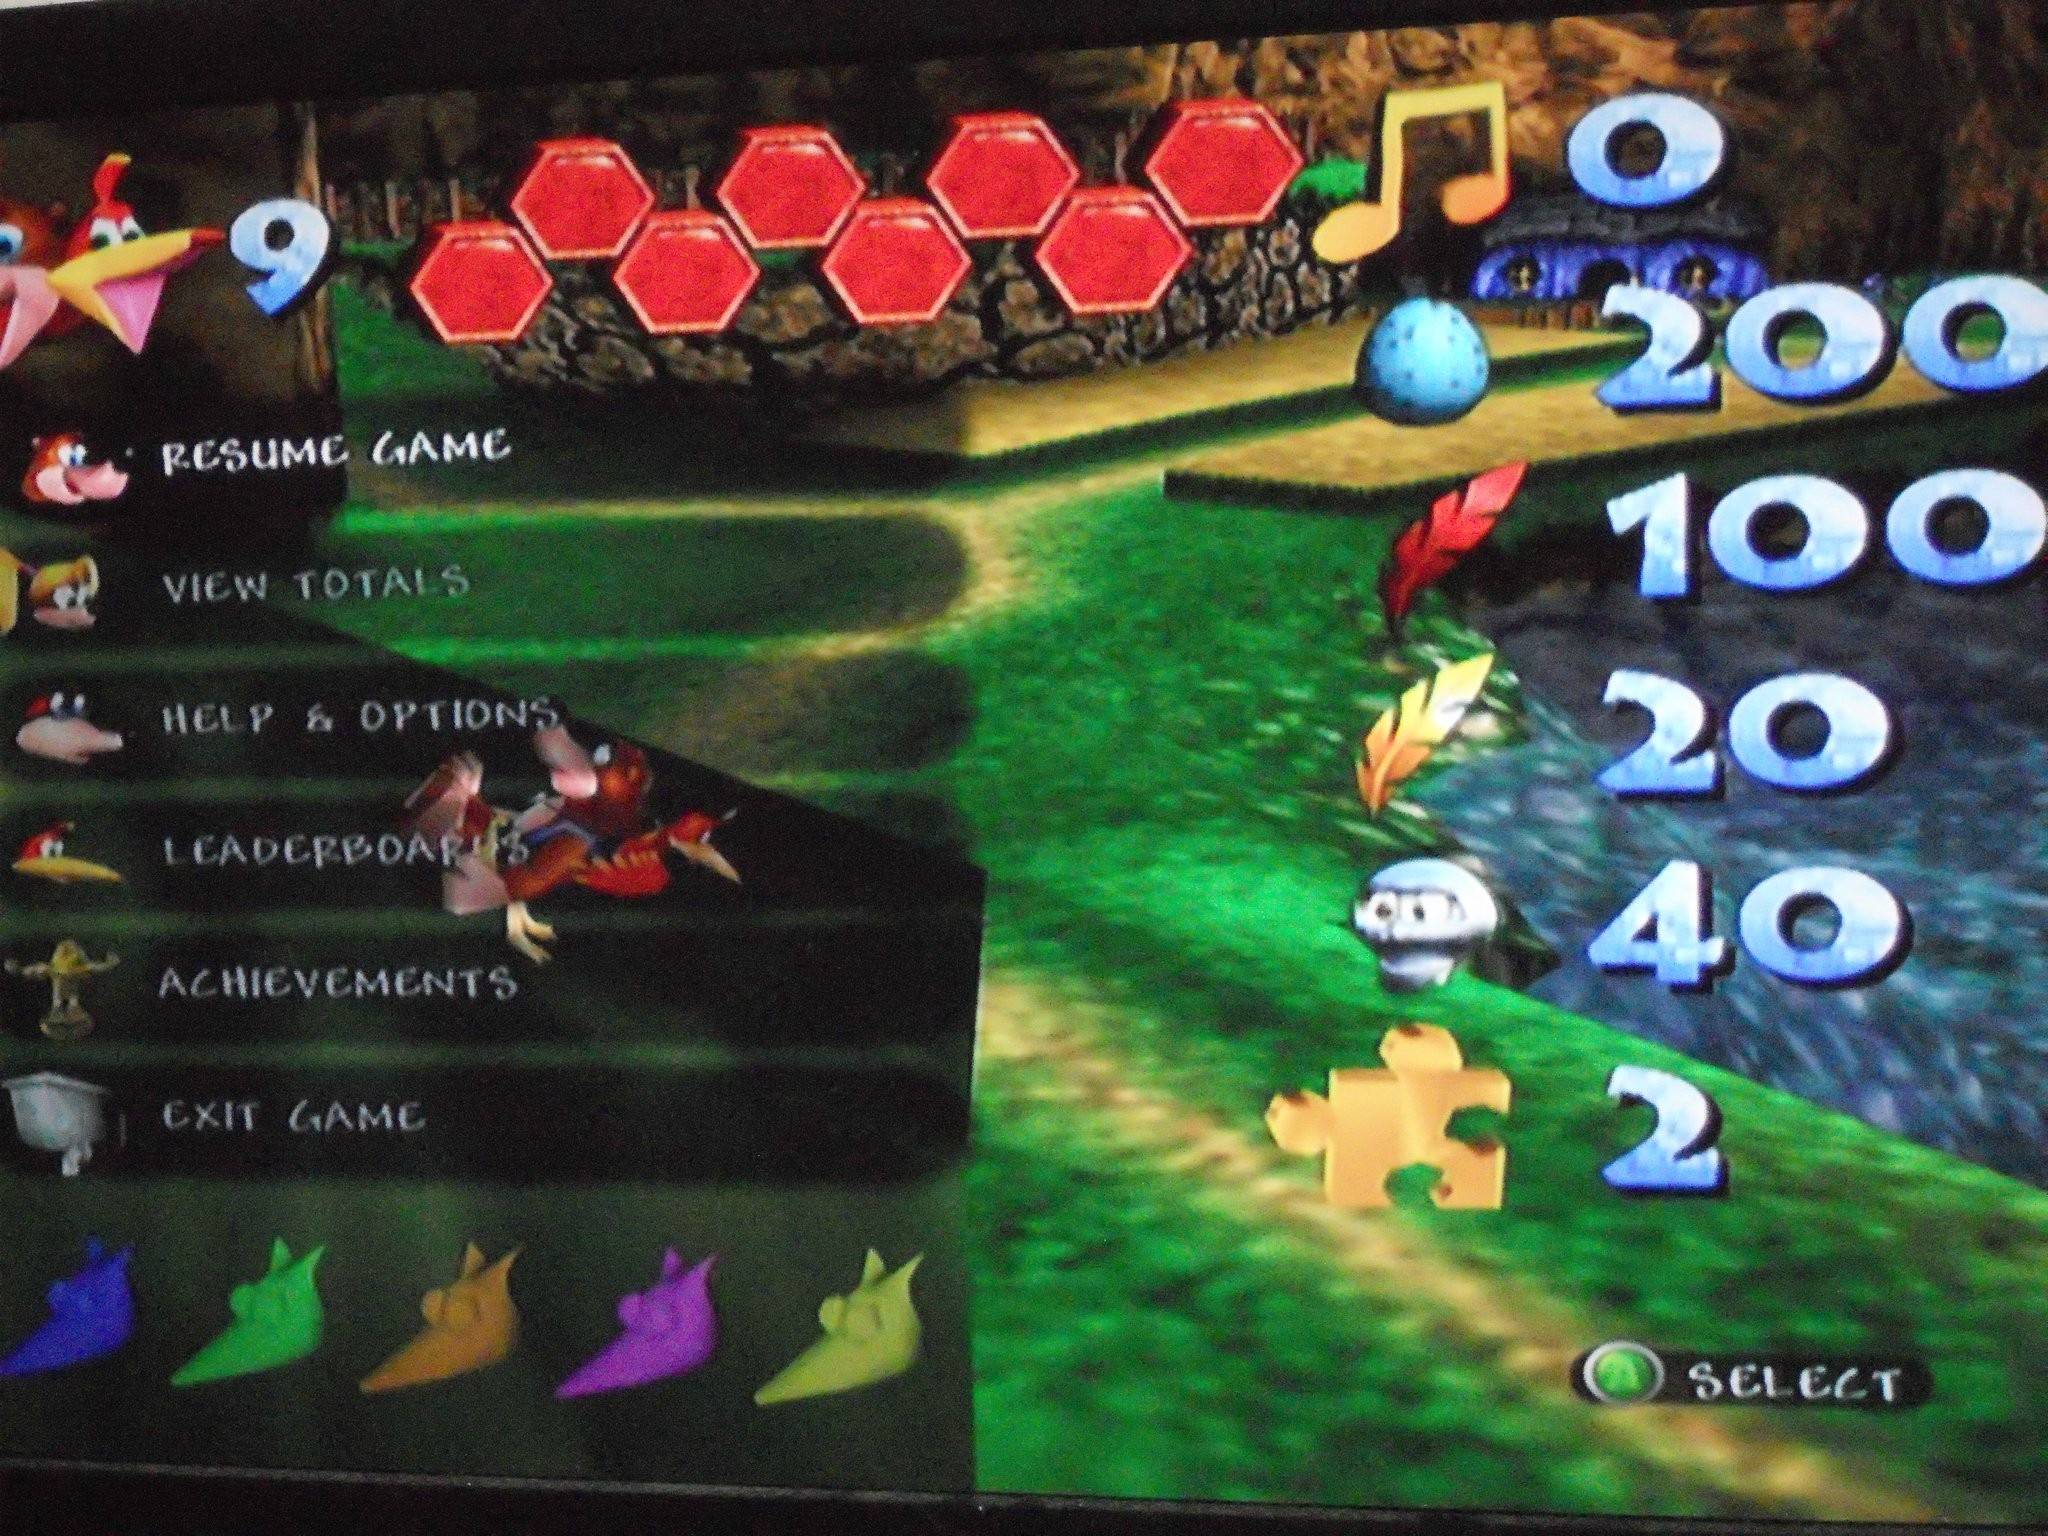 Well, I Finally Beat Banjo-kazooie With 100% Completion - Banjo Kazooie 100% , HD Wallpaper & Backgrounds